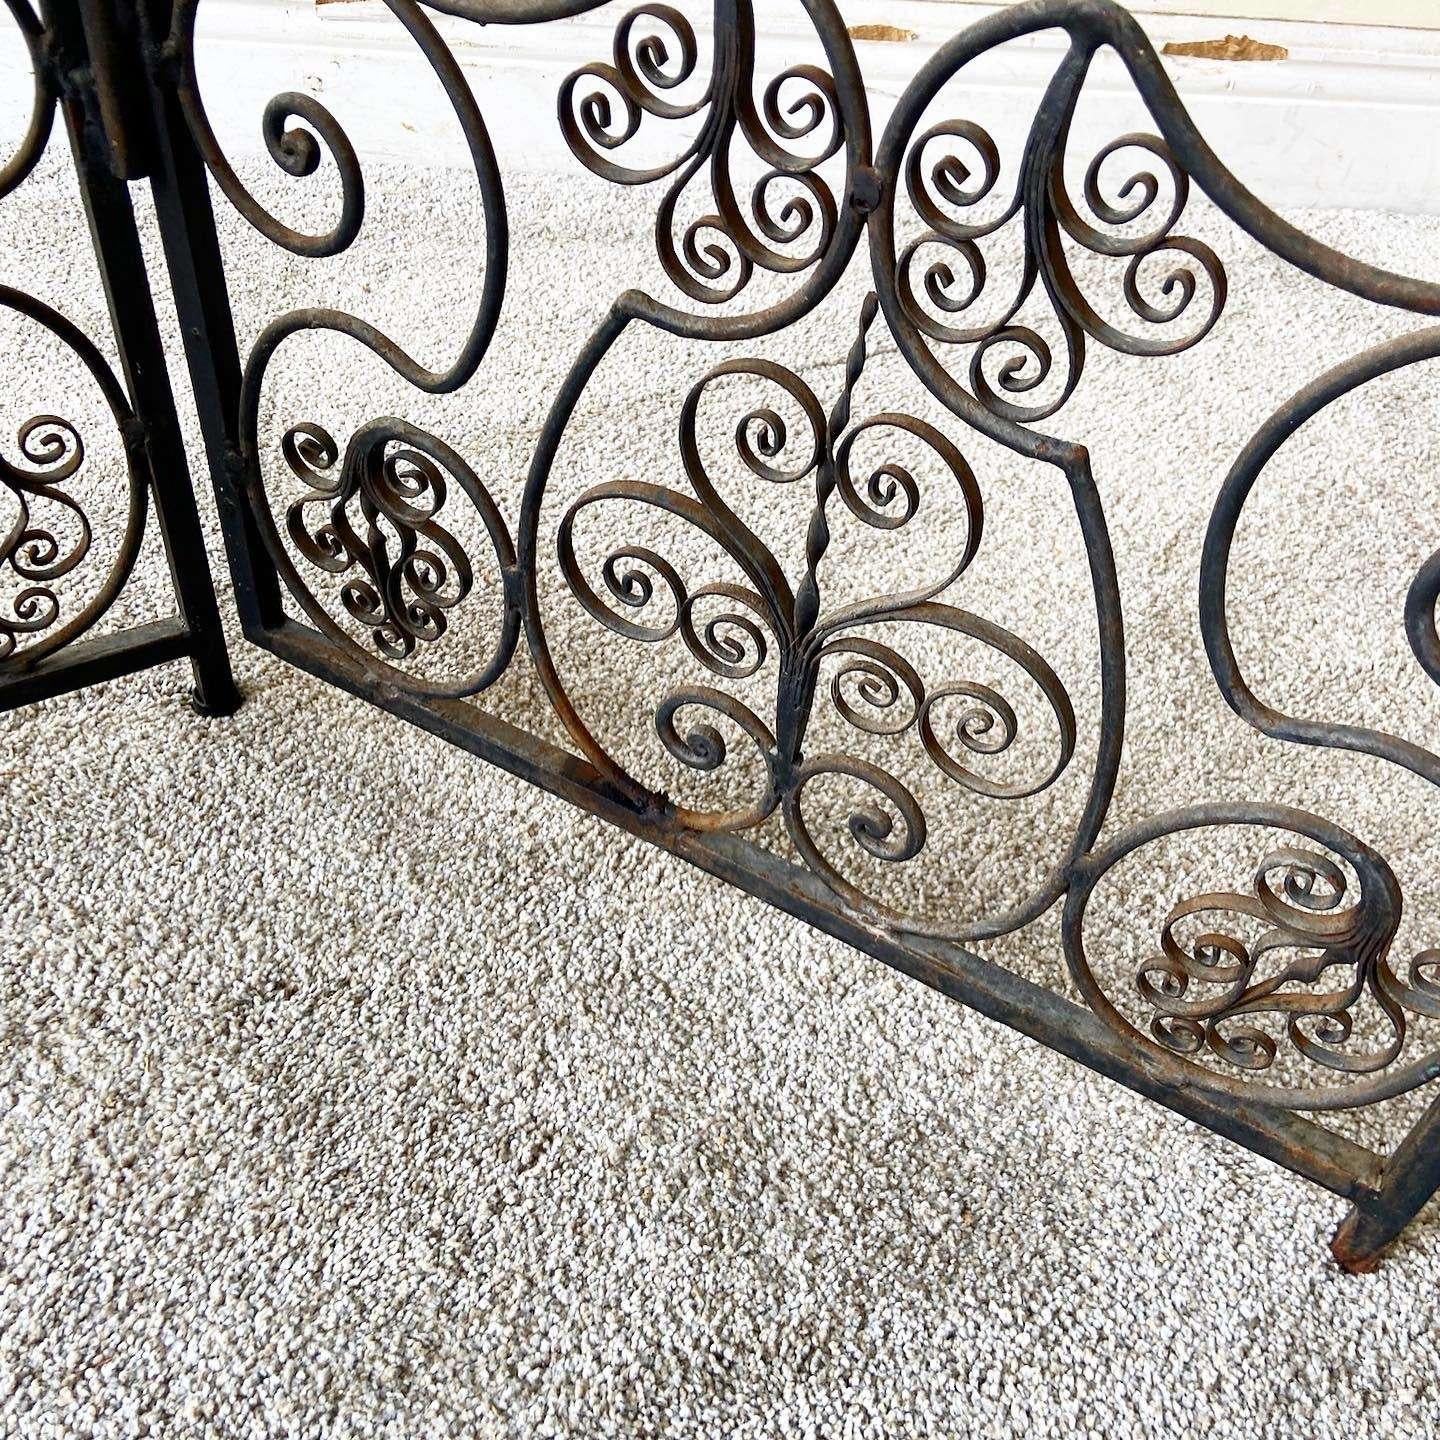 Amazing 4 panel wrought iron room divider/screen. Features and ornate sculpted design with a black finish.
